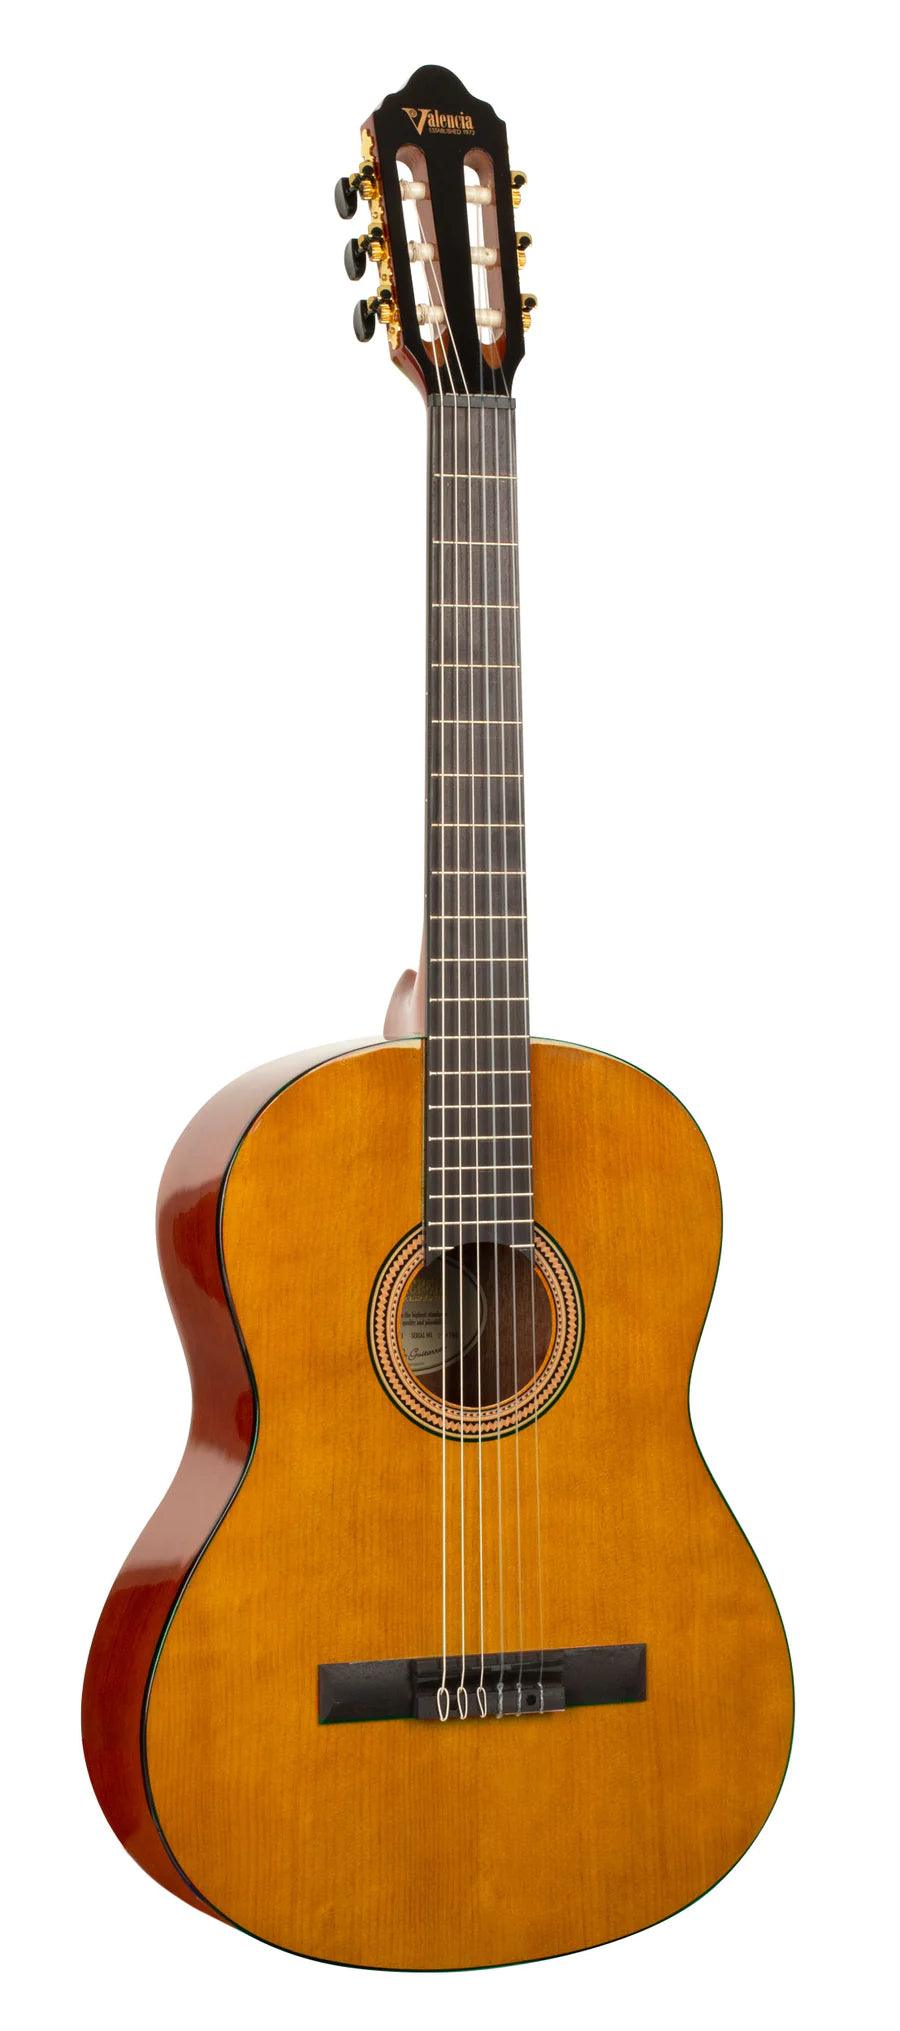 3/4 Classical Hybrid Guitar 260 Series - Guitars - Classical by Valencia at Muso's Stuff